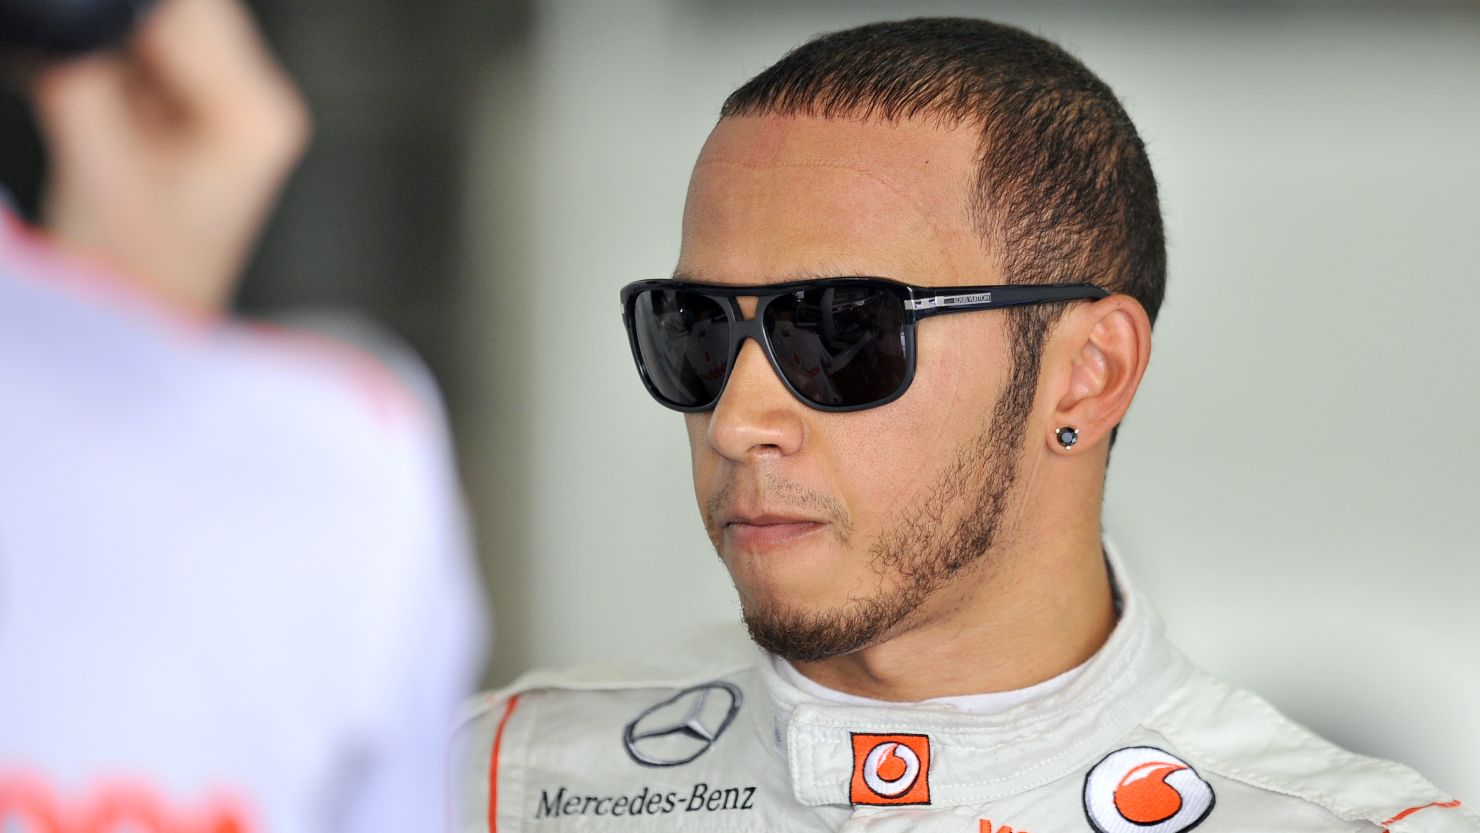 Lewis Hamilton made his breakthrough with McLaren in 2007, but he will join Mercedes in 2013.